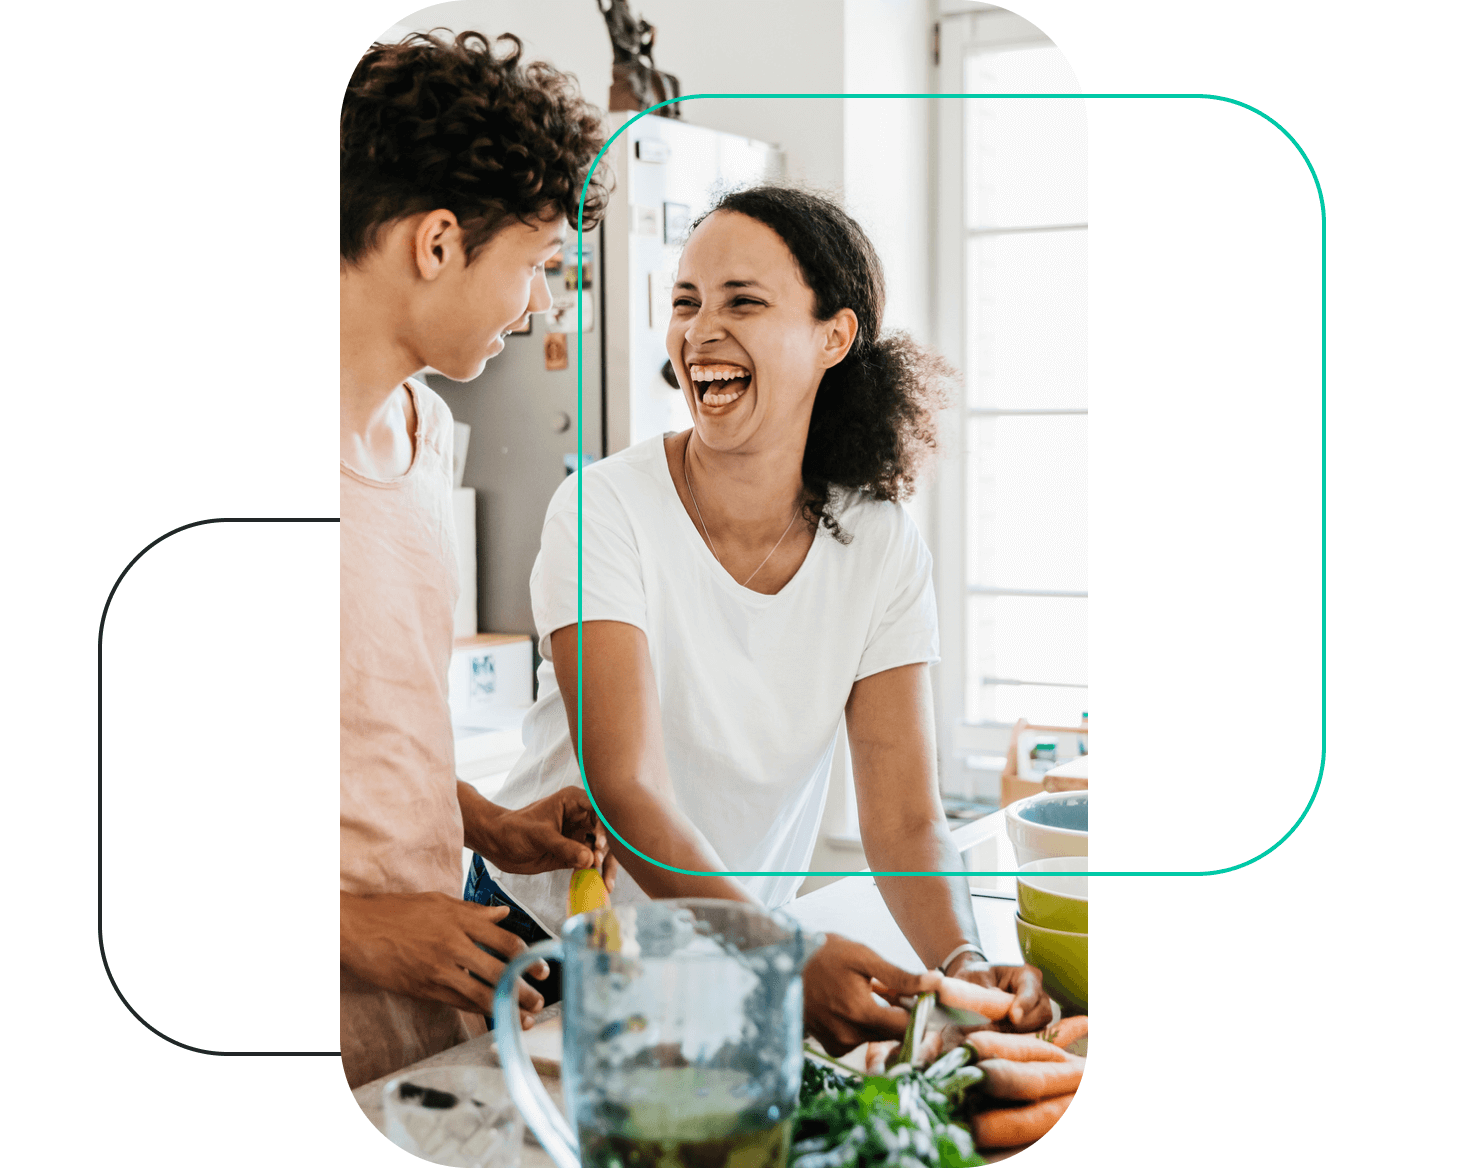 Smiling mom and teen son in kitchen cooking and talking about Greenlight’s family credit card with up to 3 percent cash back
